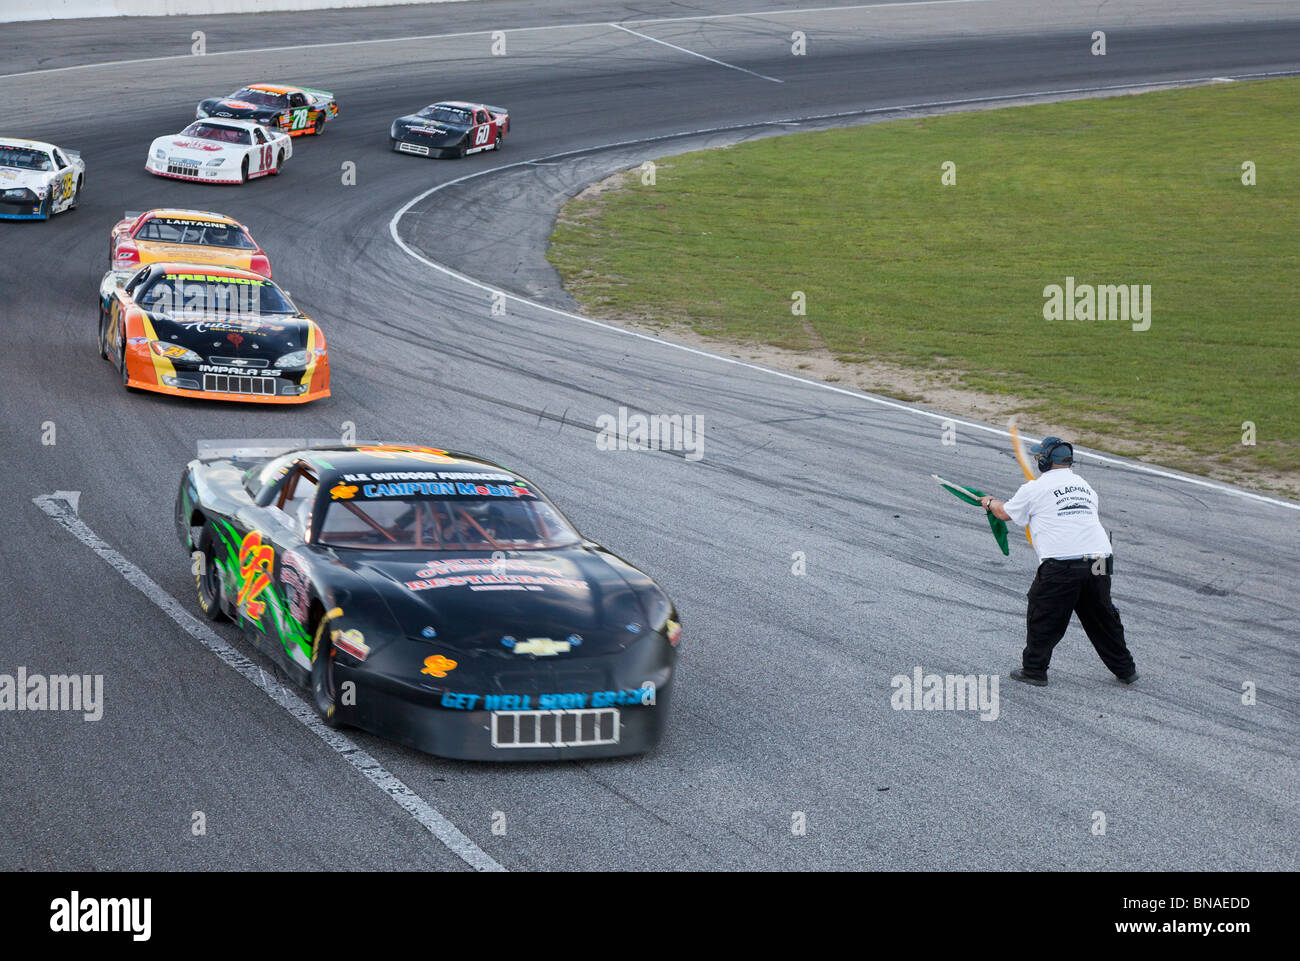 Woodstock, New Hampshire - Stock car racing at White Mountain Motorsports Park. The flagman slows cars after a collision. Stock Photo